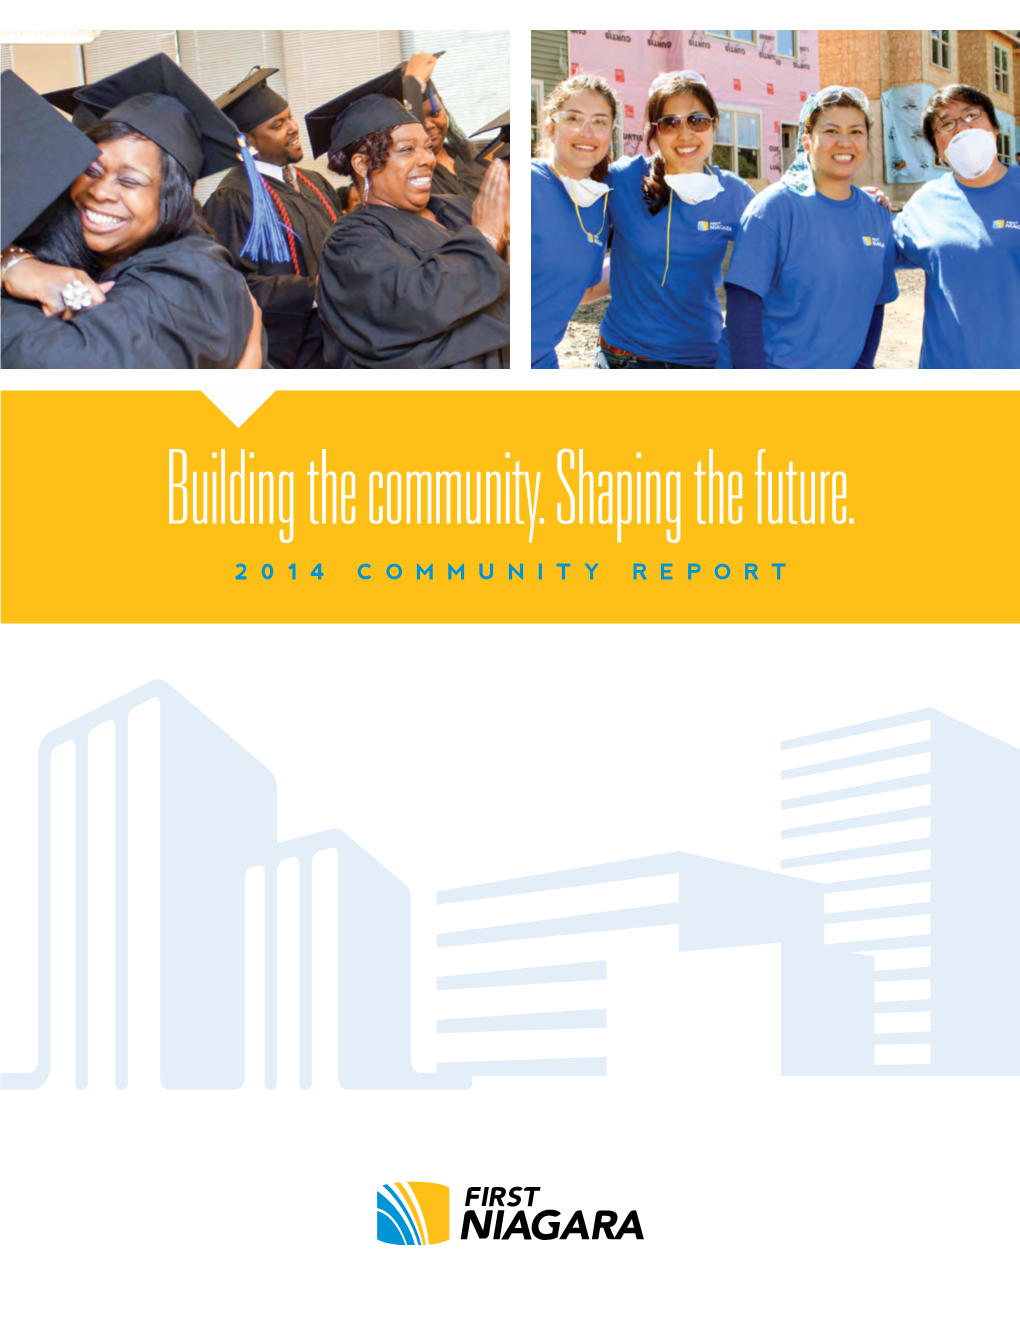 Building the Community. Shaping the Future. 2014 COMMUNITY REPORT to Us, Community Matters